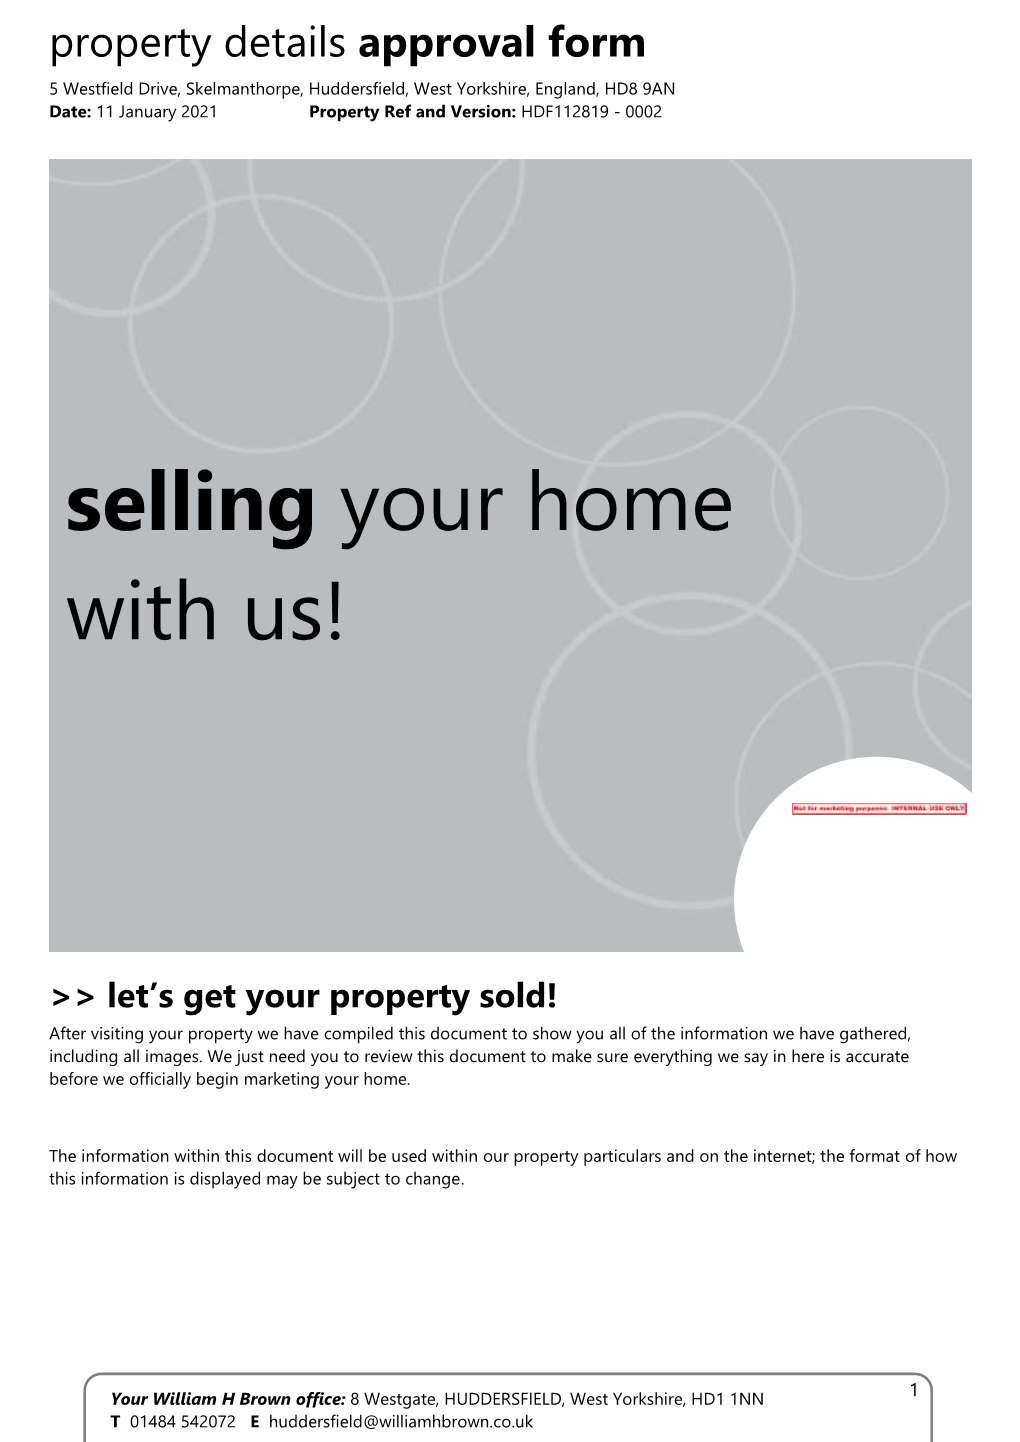 Selling Your Home with Us!